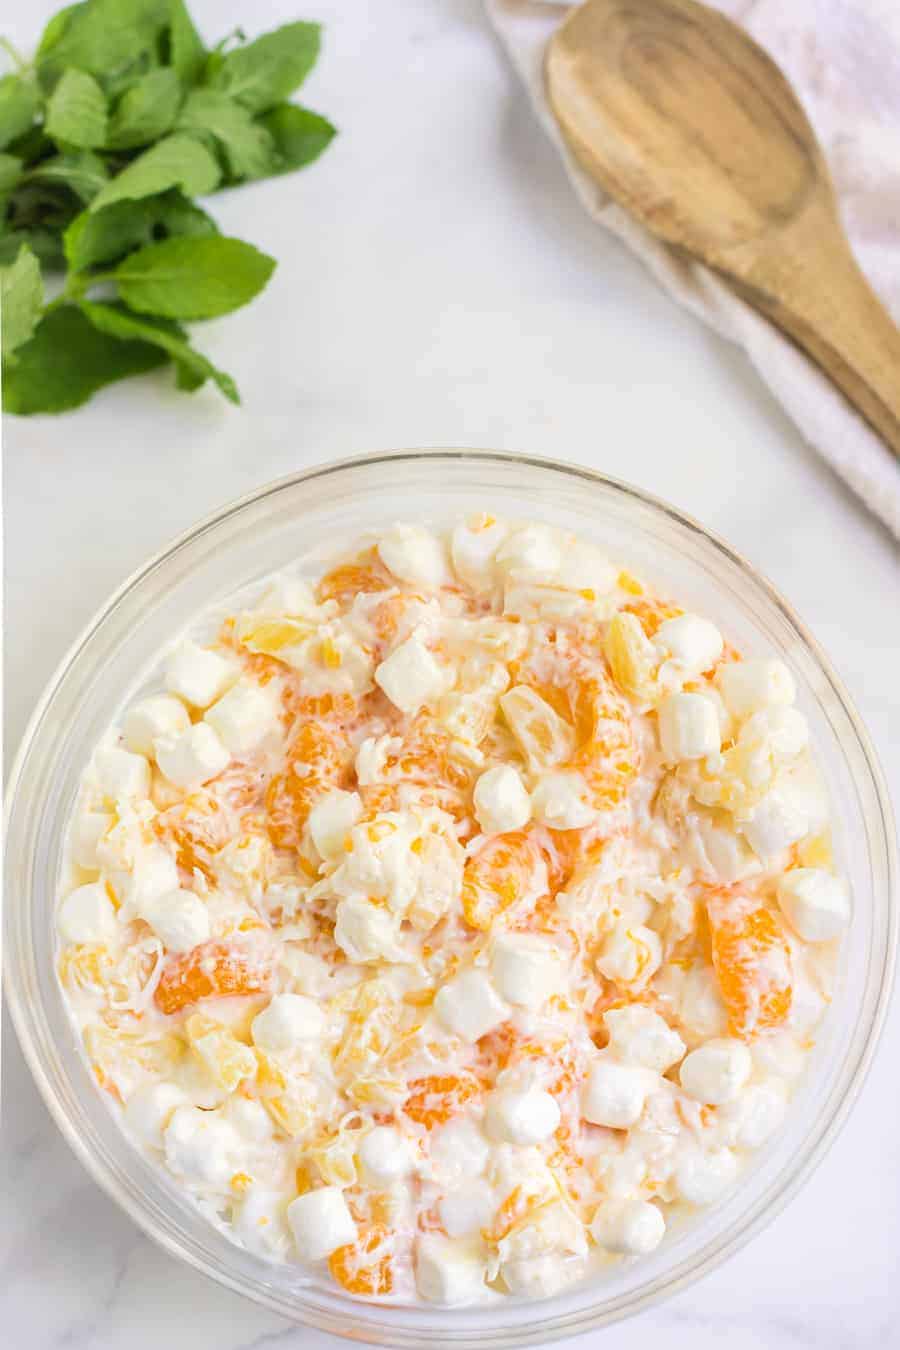 This tasty and creamy 6-cup ambrosia fruit salad is the simplest thing to make and is forever a hit for kiddos and adults alike at any gathering! #ambrosiafruitsalad #fruitsalad #fruit #fruitrecipes #salad #southerndishes #fruitsaladrecipe